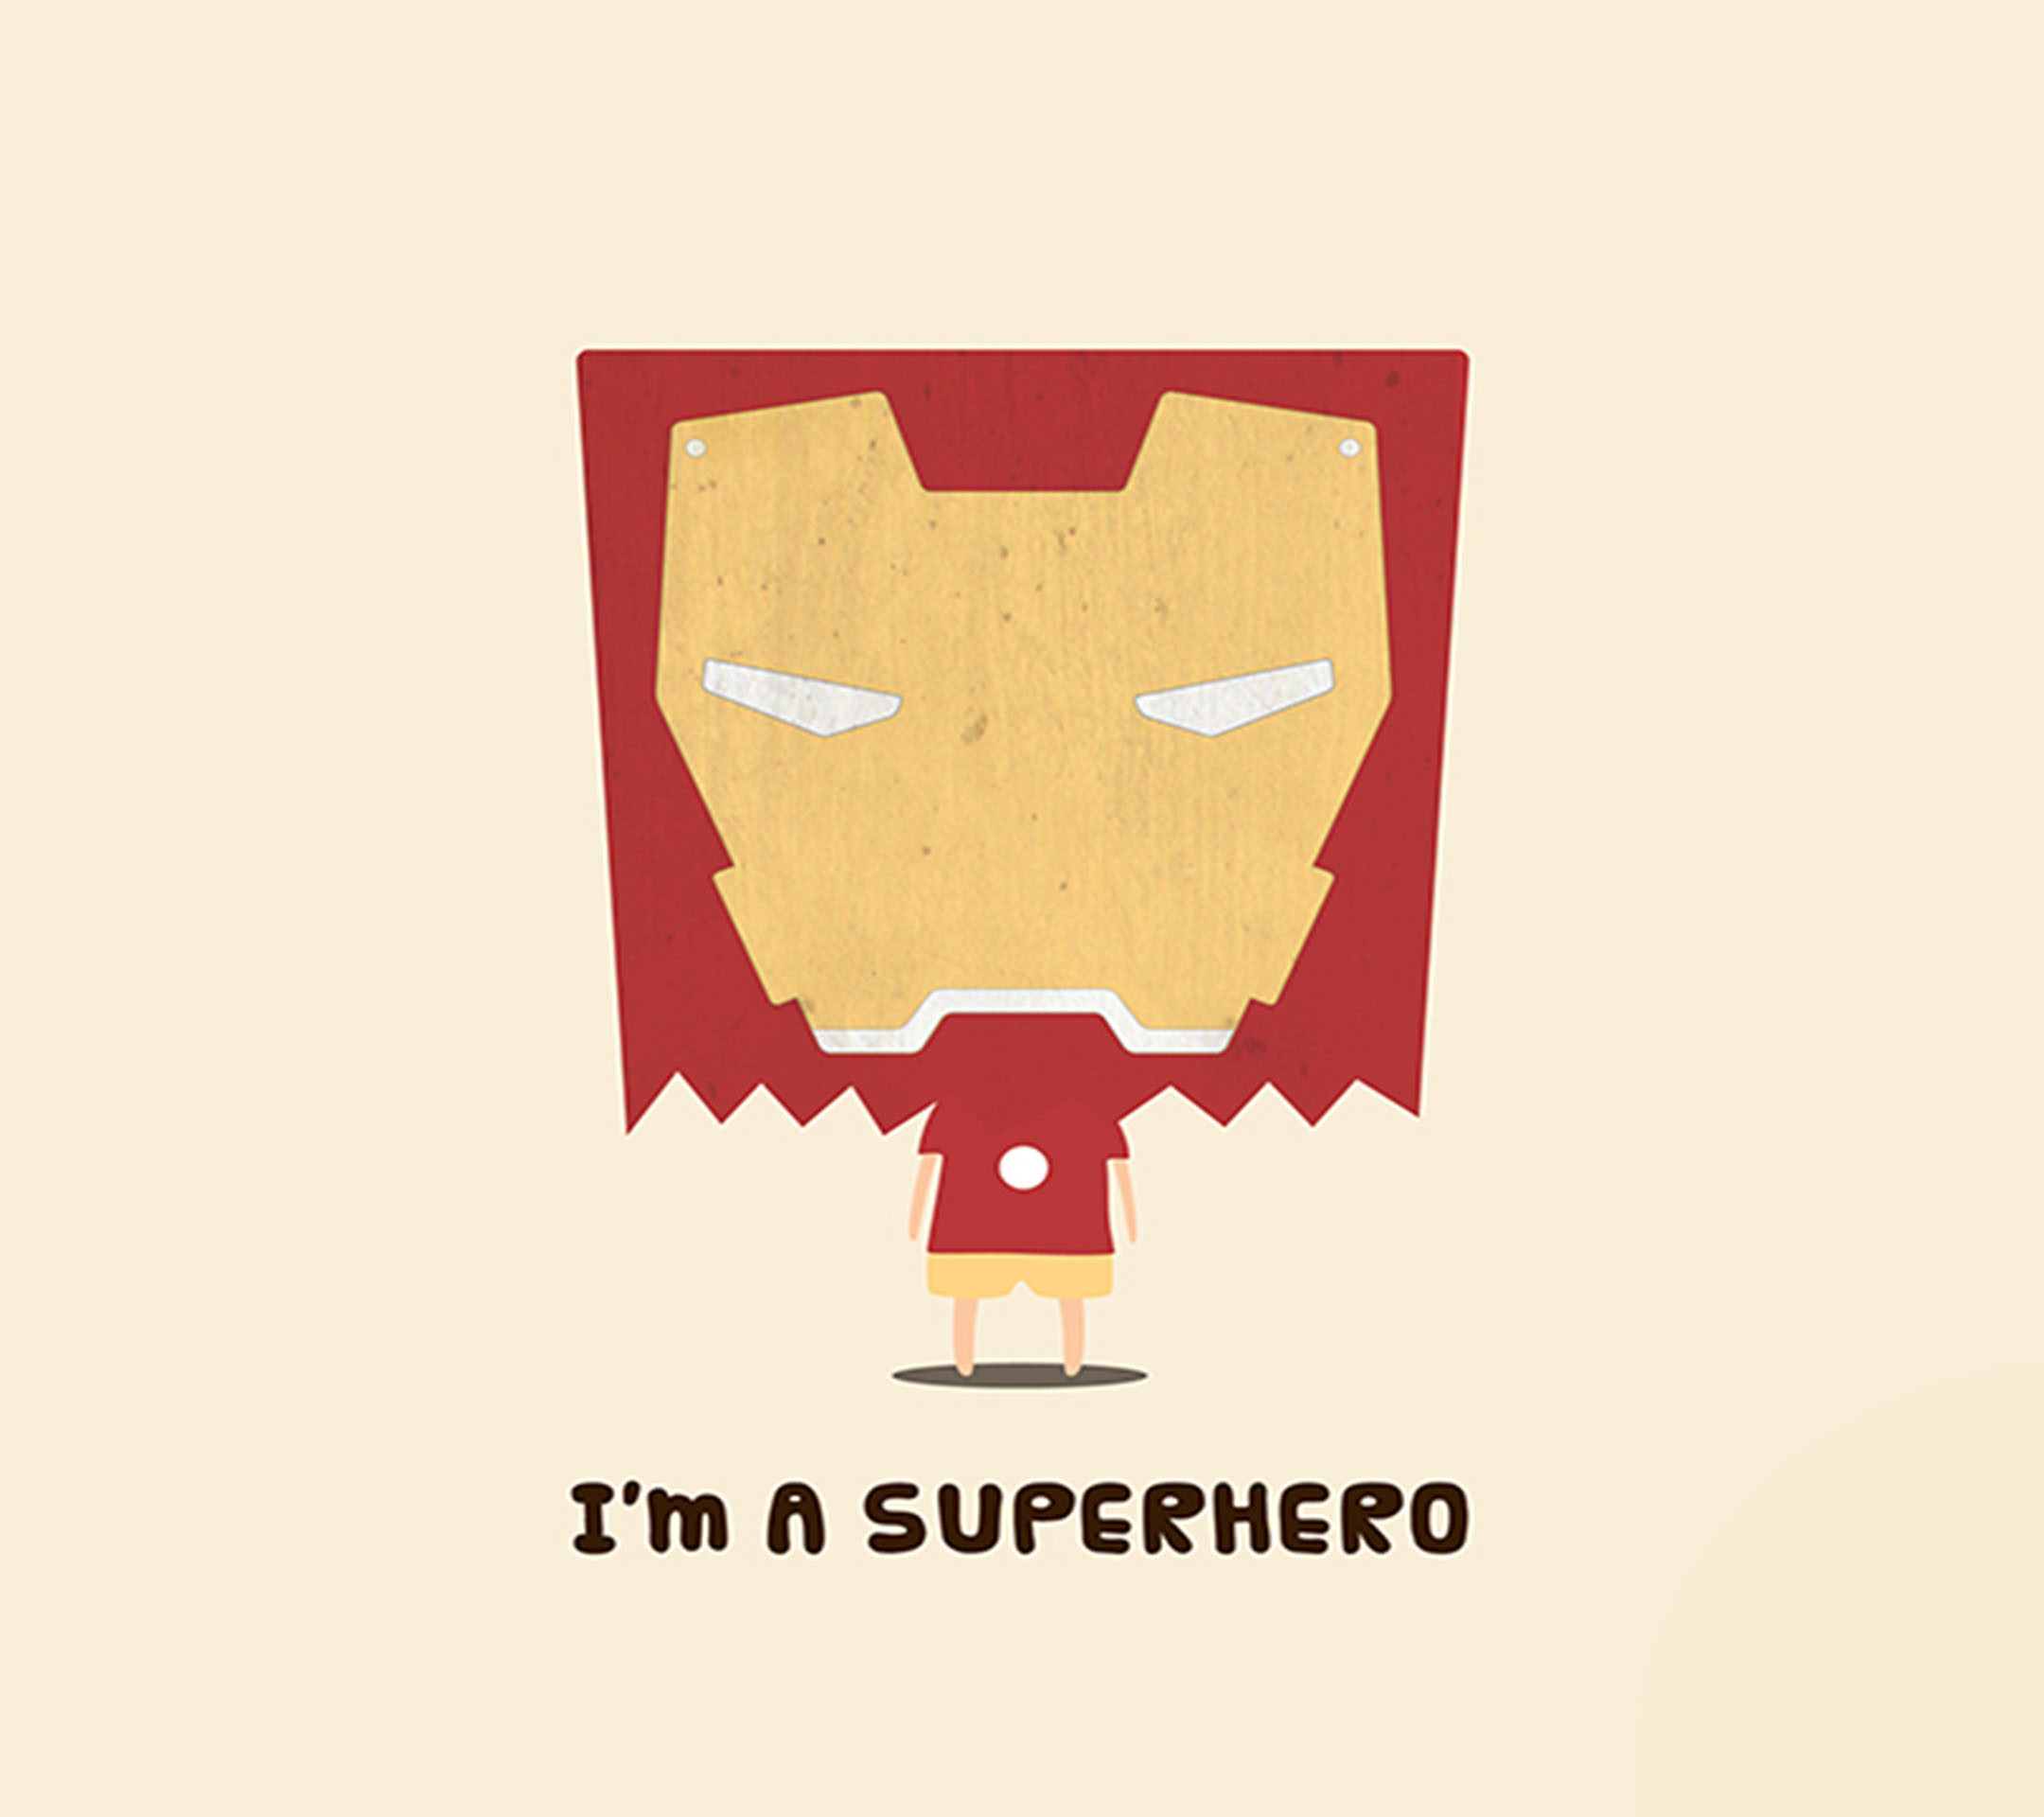 2160x1920 I'm a #superhero - #cute #ironman Android wallpaper @mobile9